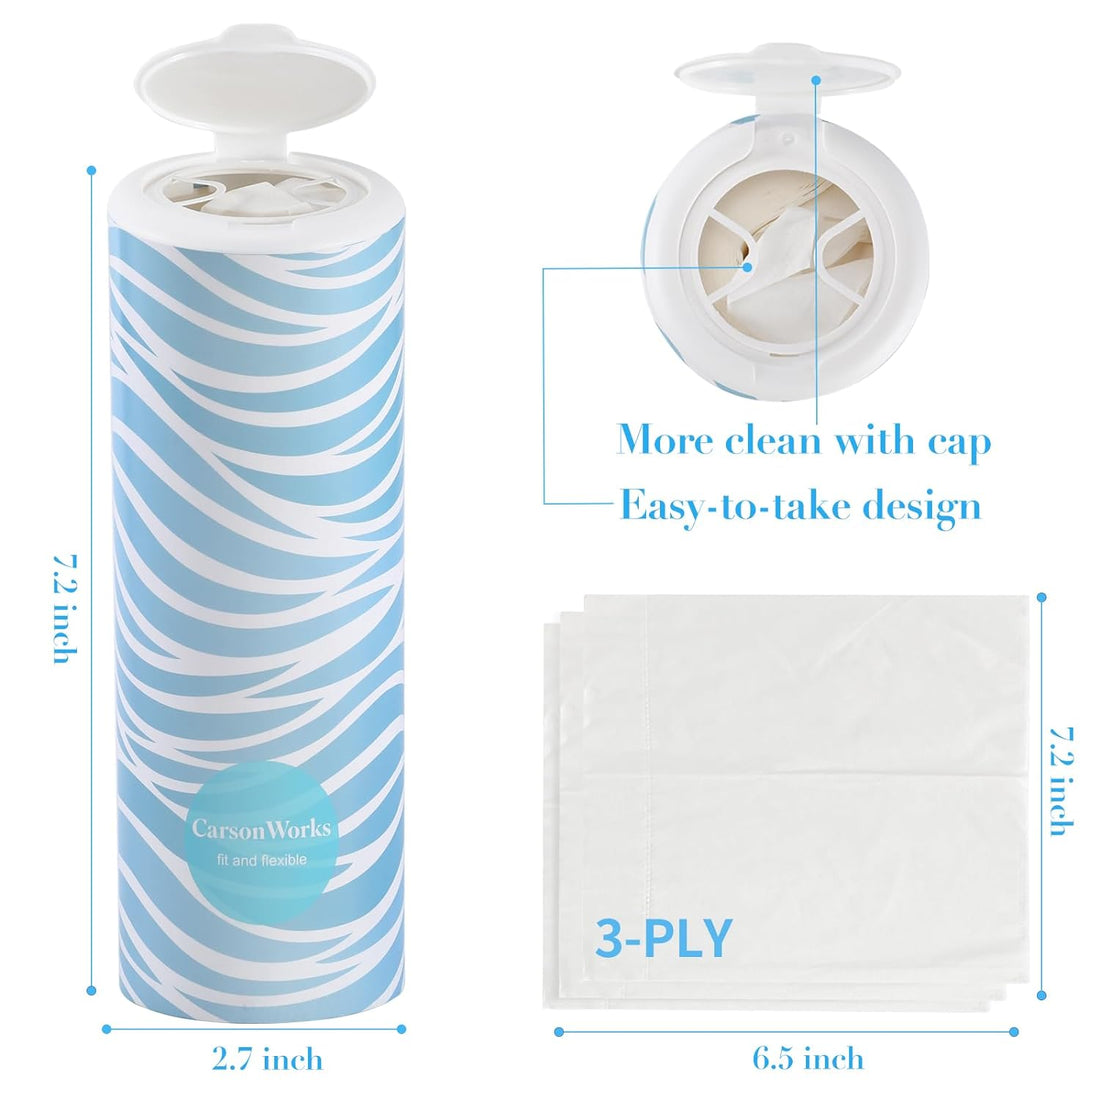 CarsonWorks Car Tissue Holder 4 Packs Round Box Tissues Cylinder Fit for Car Cup Holder, Home Small Tissue Dispenser with Refill Facial Tissues